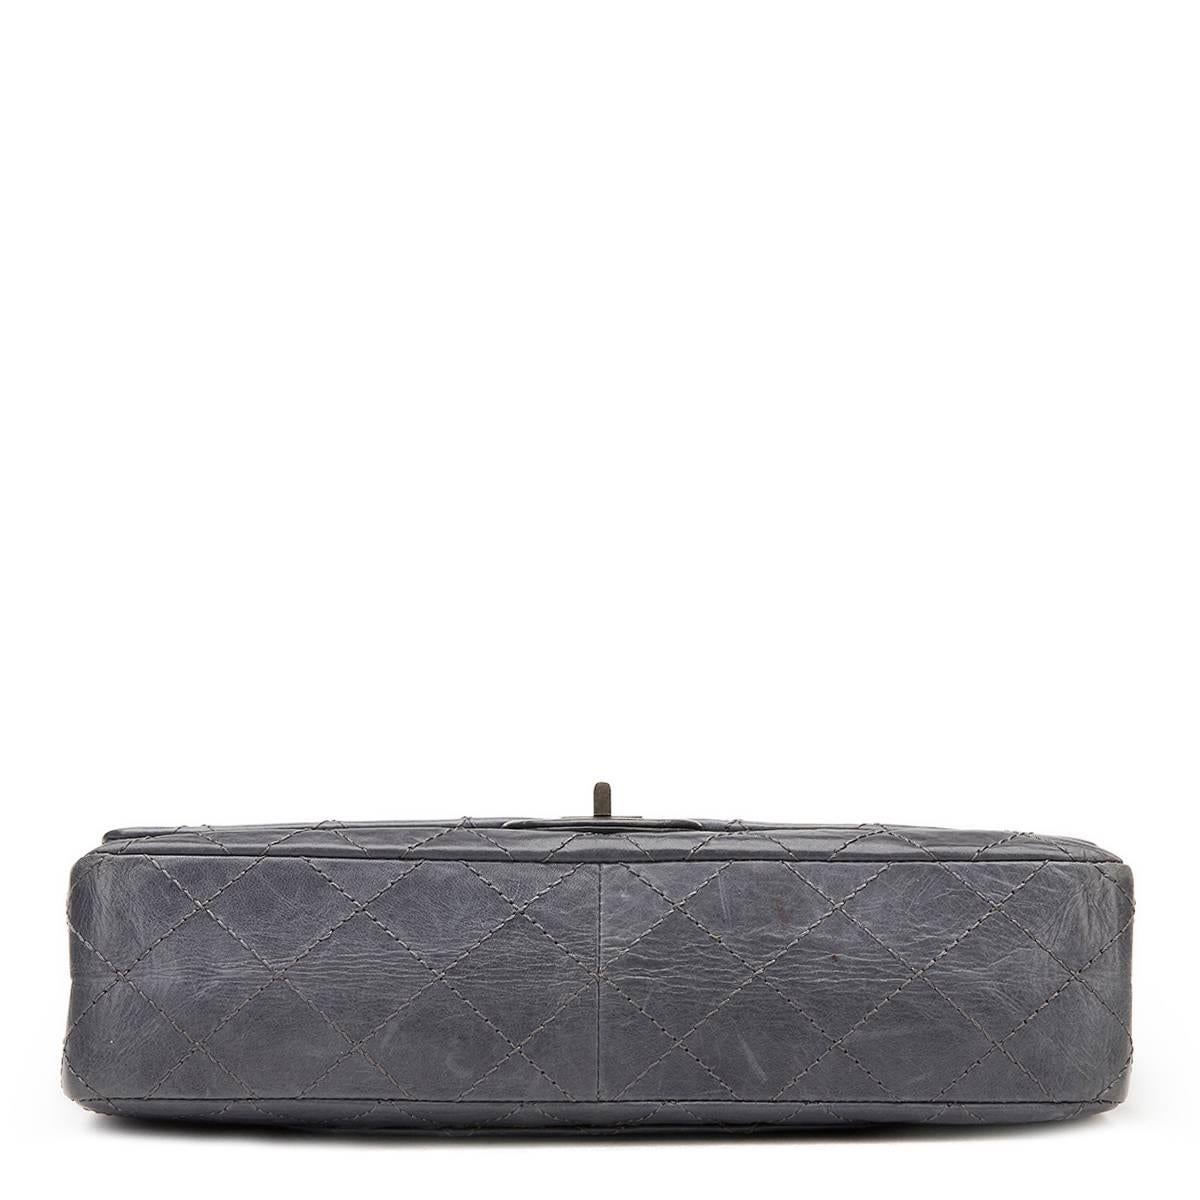 CHANEL
Grey Quilted Calfskin 50th Anniversary 2.55 Reissue 226 Double Flap Bag

This CHANEL 2.55 Reissue 226 Double Flap Bag is in Excellent Pre-Owned Condition accompanied by Chanel Dust Bag, Authenticity Card, Care Card. Circa 2005. Primarily made